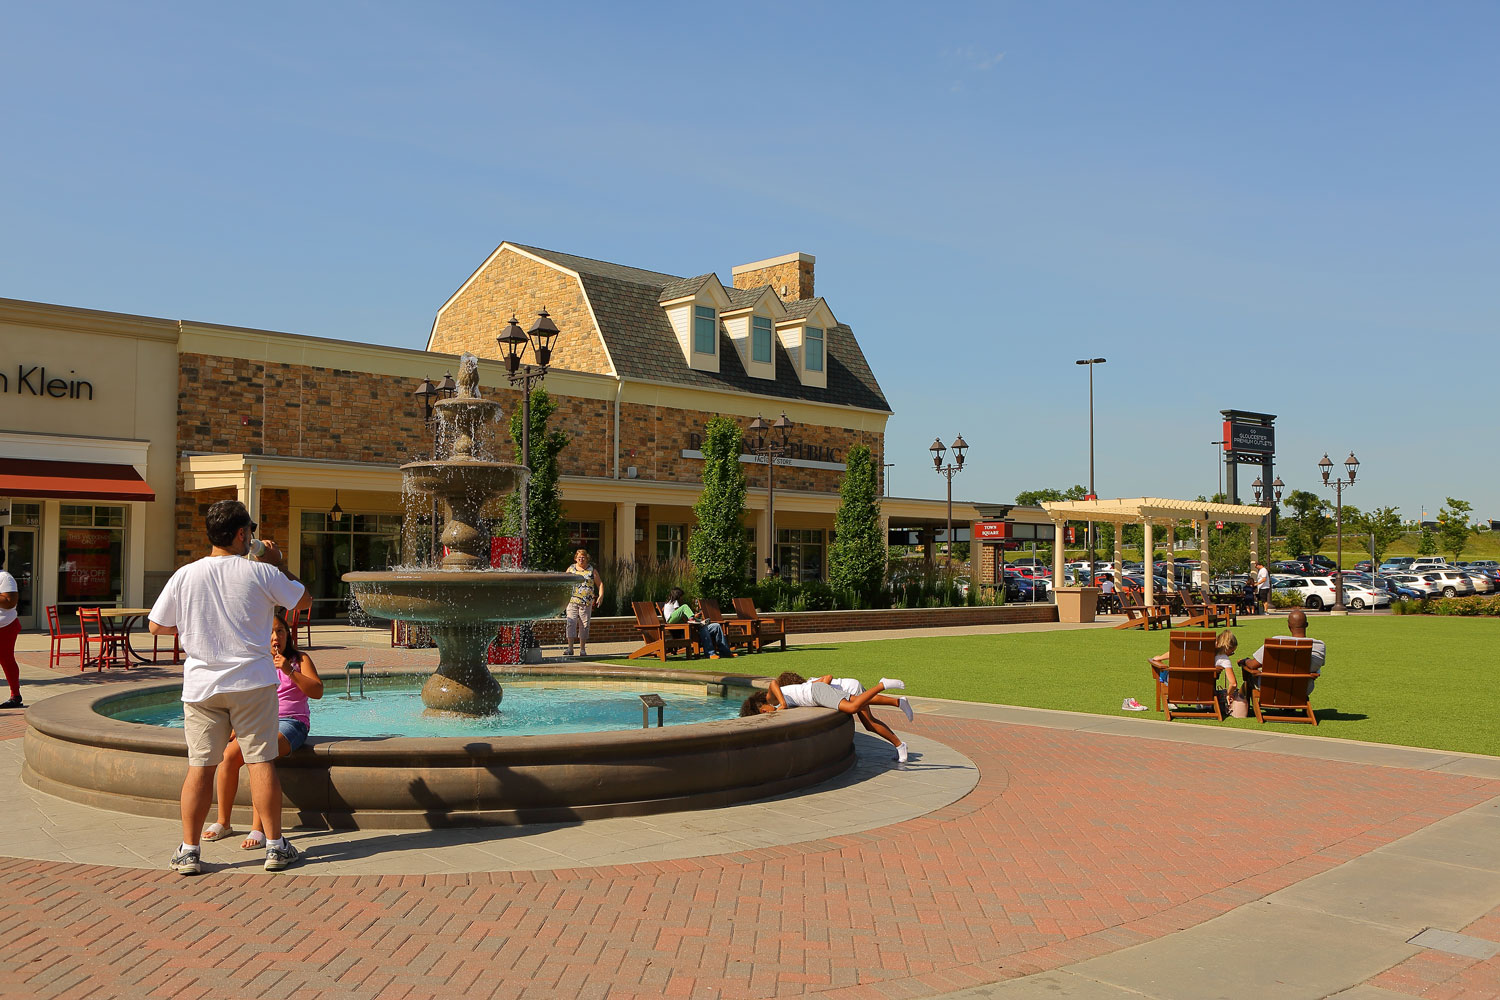 Welcome To Gloucester Premium Outlets® - A Shopping Center In Blackwood, NJ  - A Simon Property